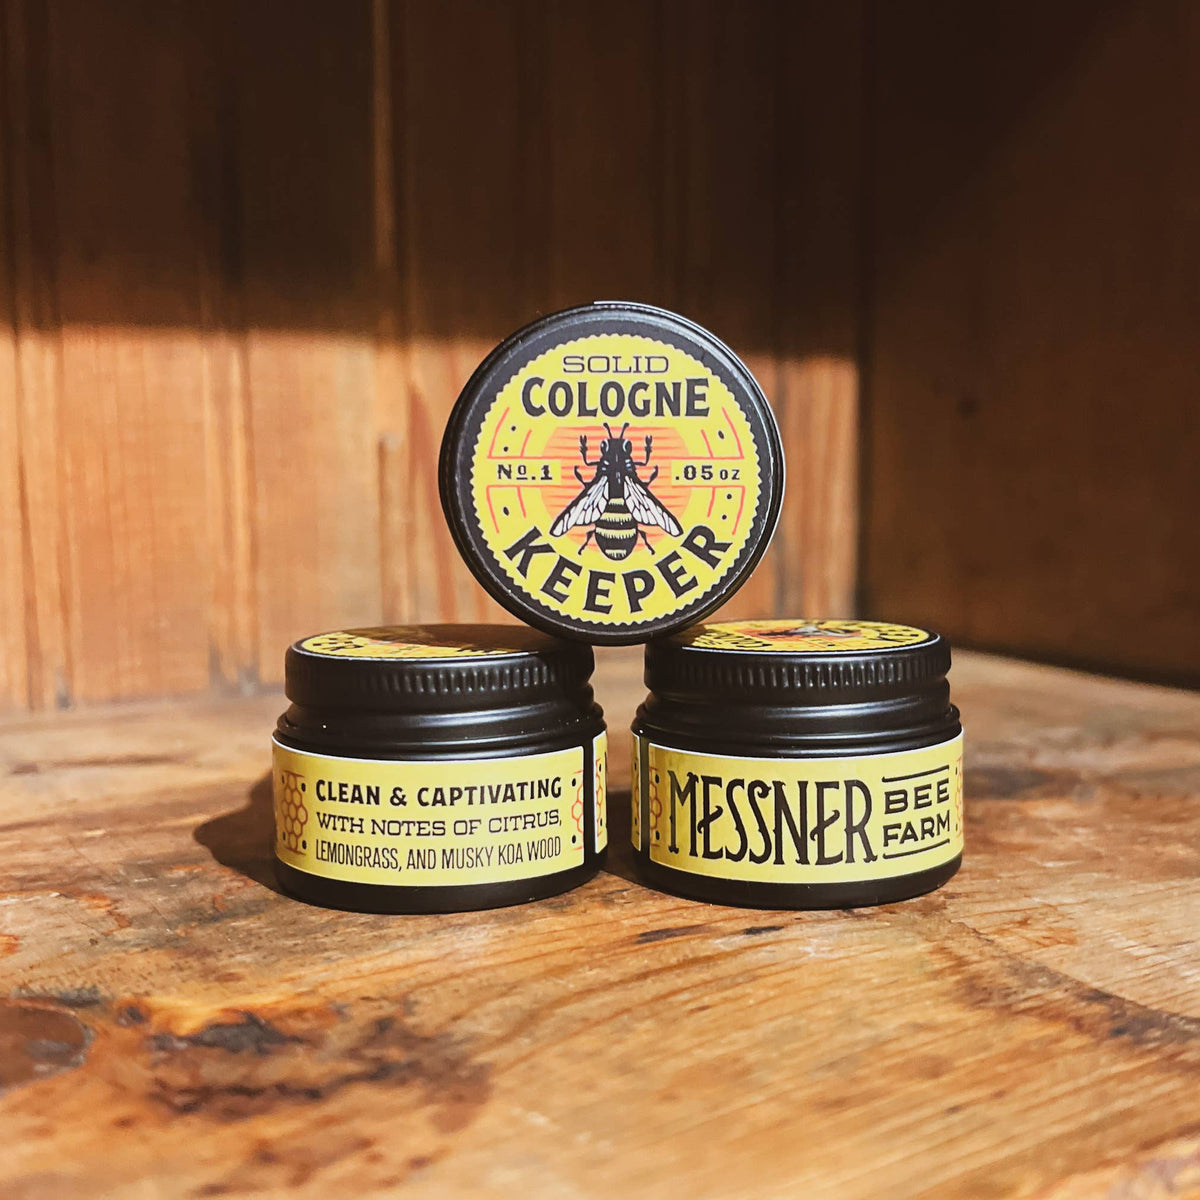 Solid Cologne - Keeper - Handmade with beeswax